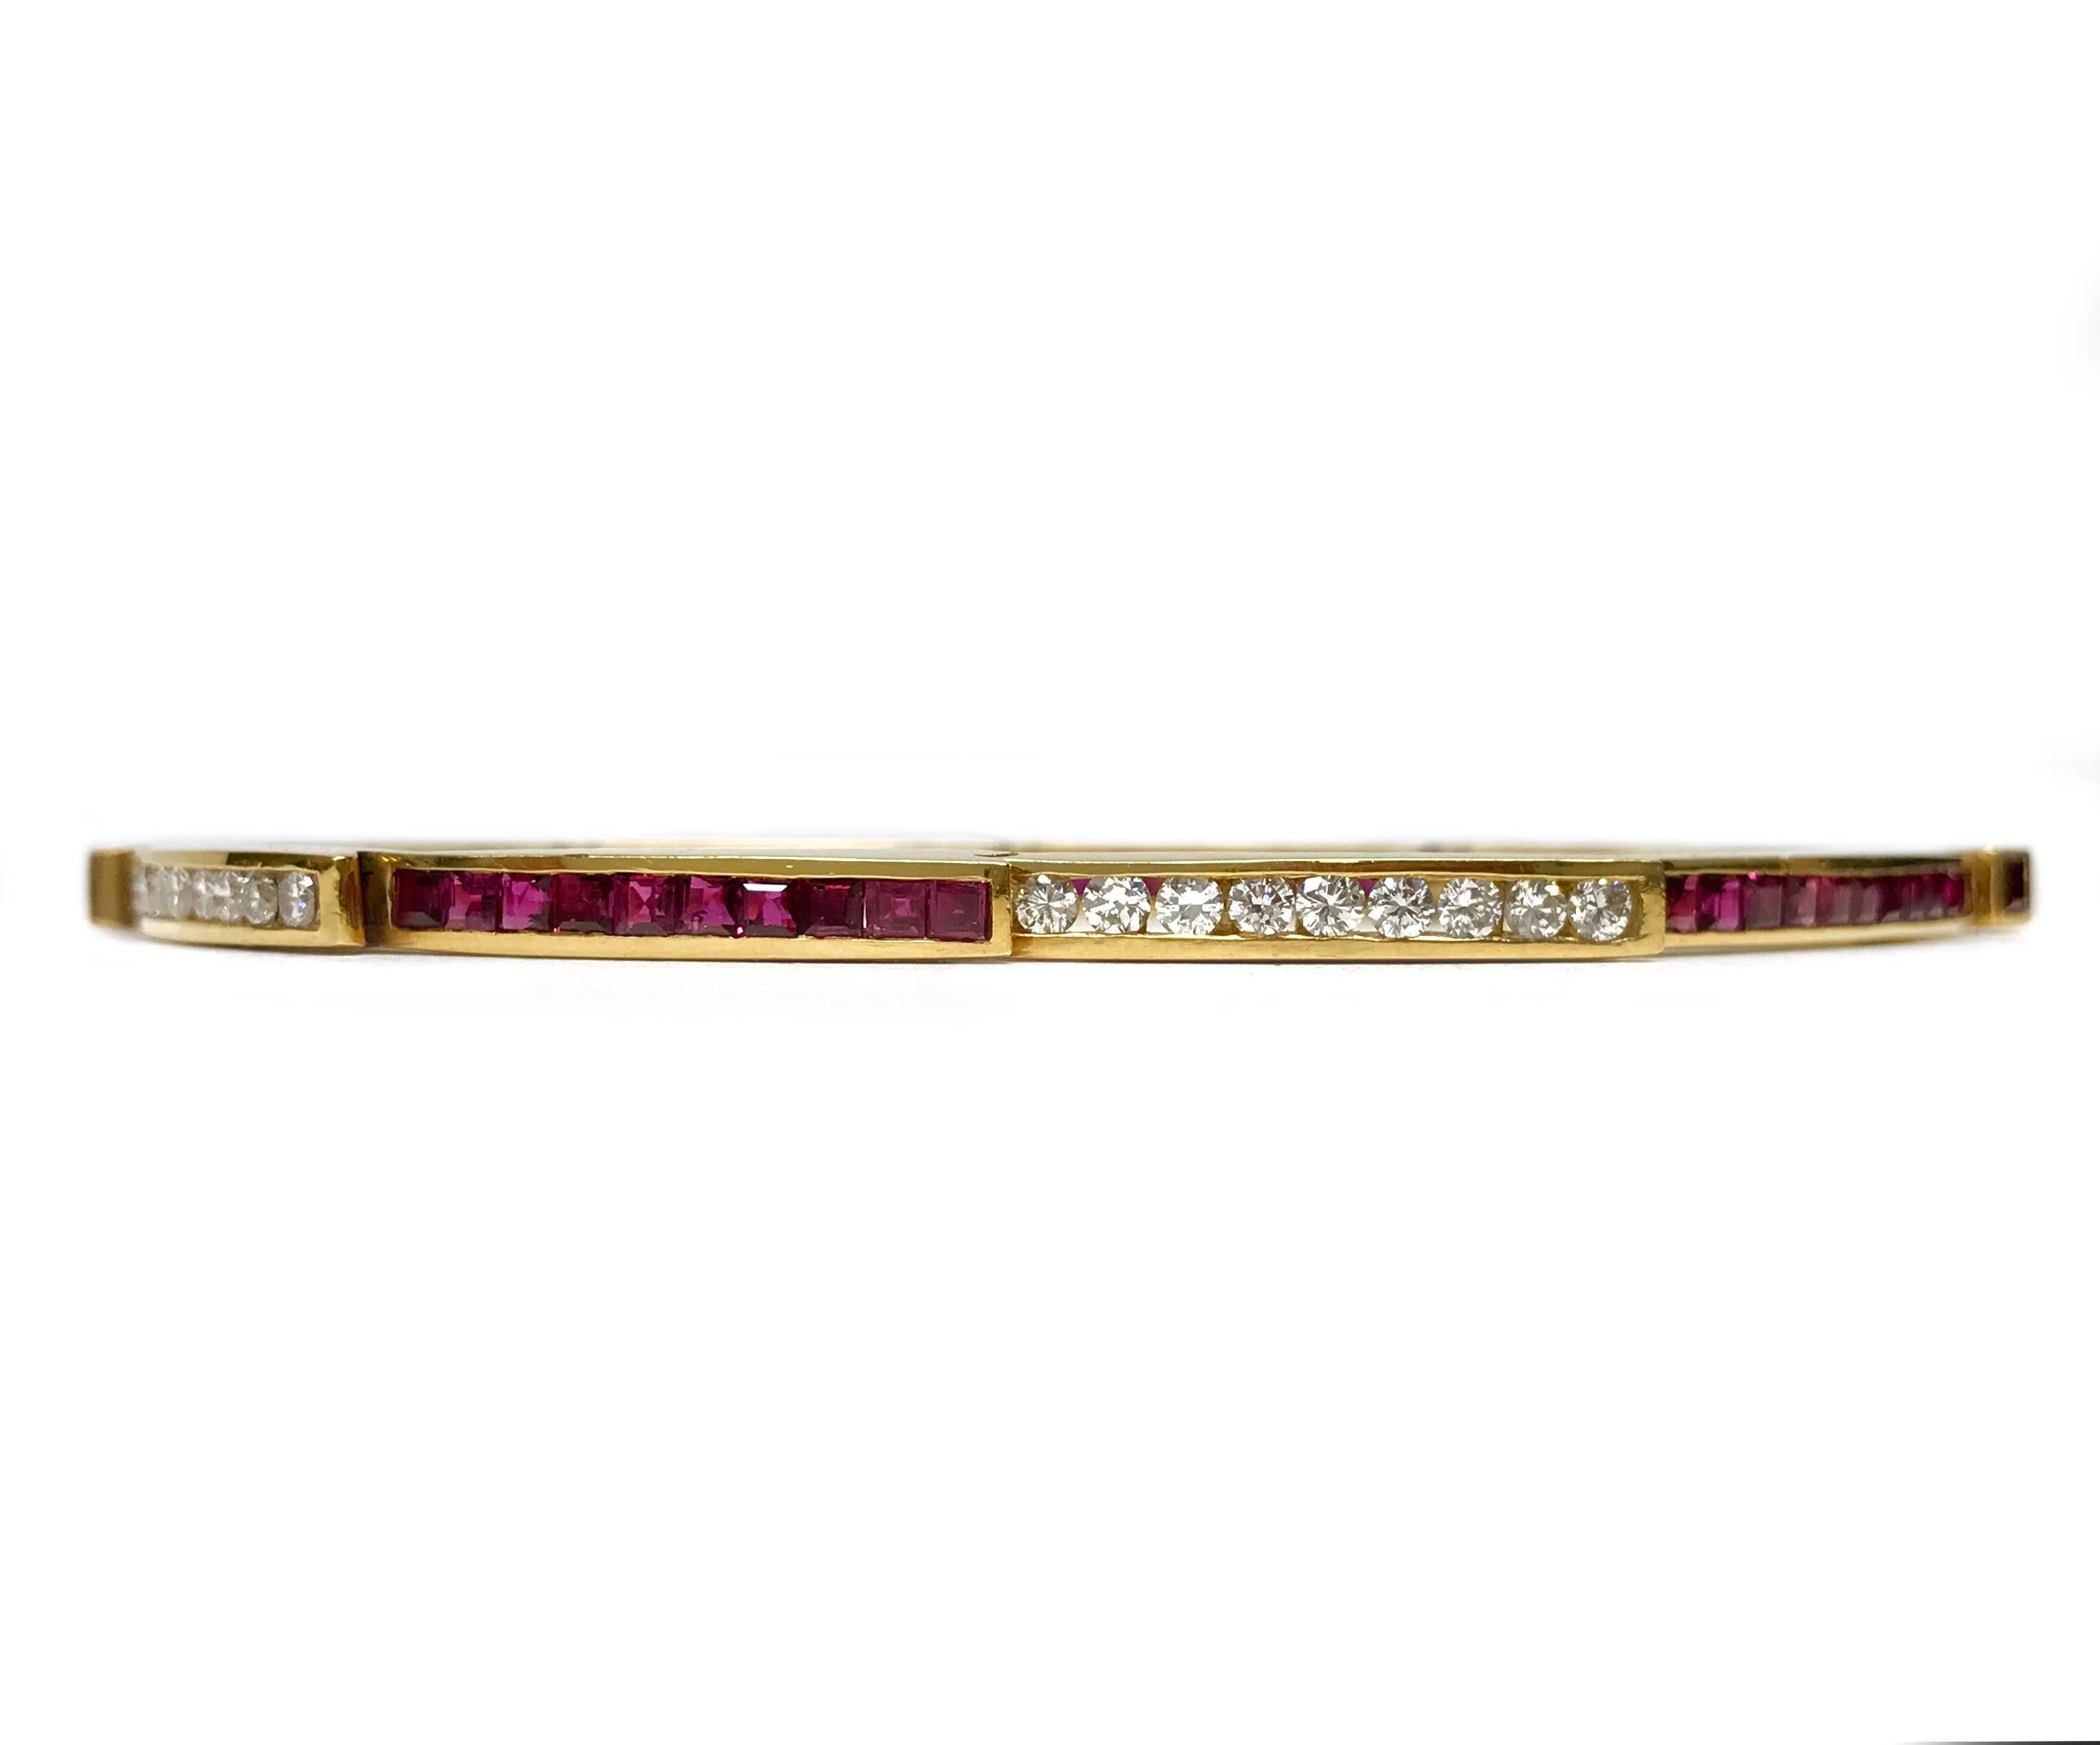 Charles Krypell Ruby Diamond 18 Karat Yellow Gold Bracelet. This lovely bracelet has four sections of rubies and four sections of diamonds, all channel-set. Forty-one AA grade princess-cut rubies with a total carat weight of 2.46tcw. Thirty-six